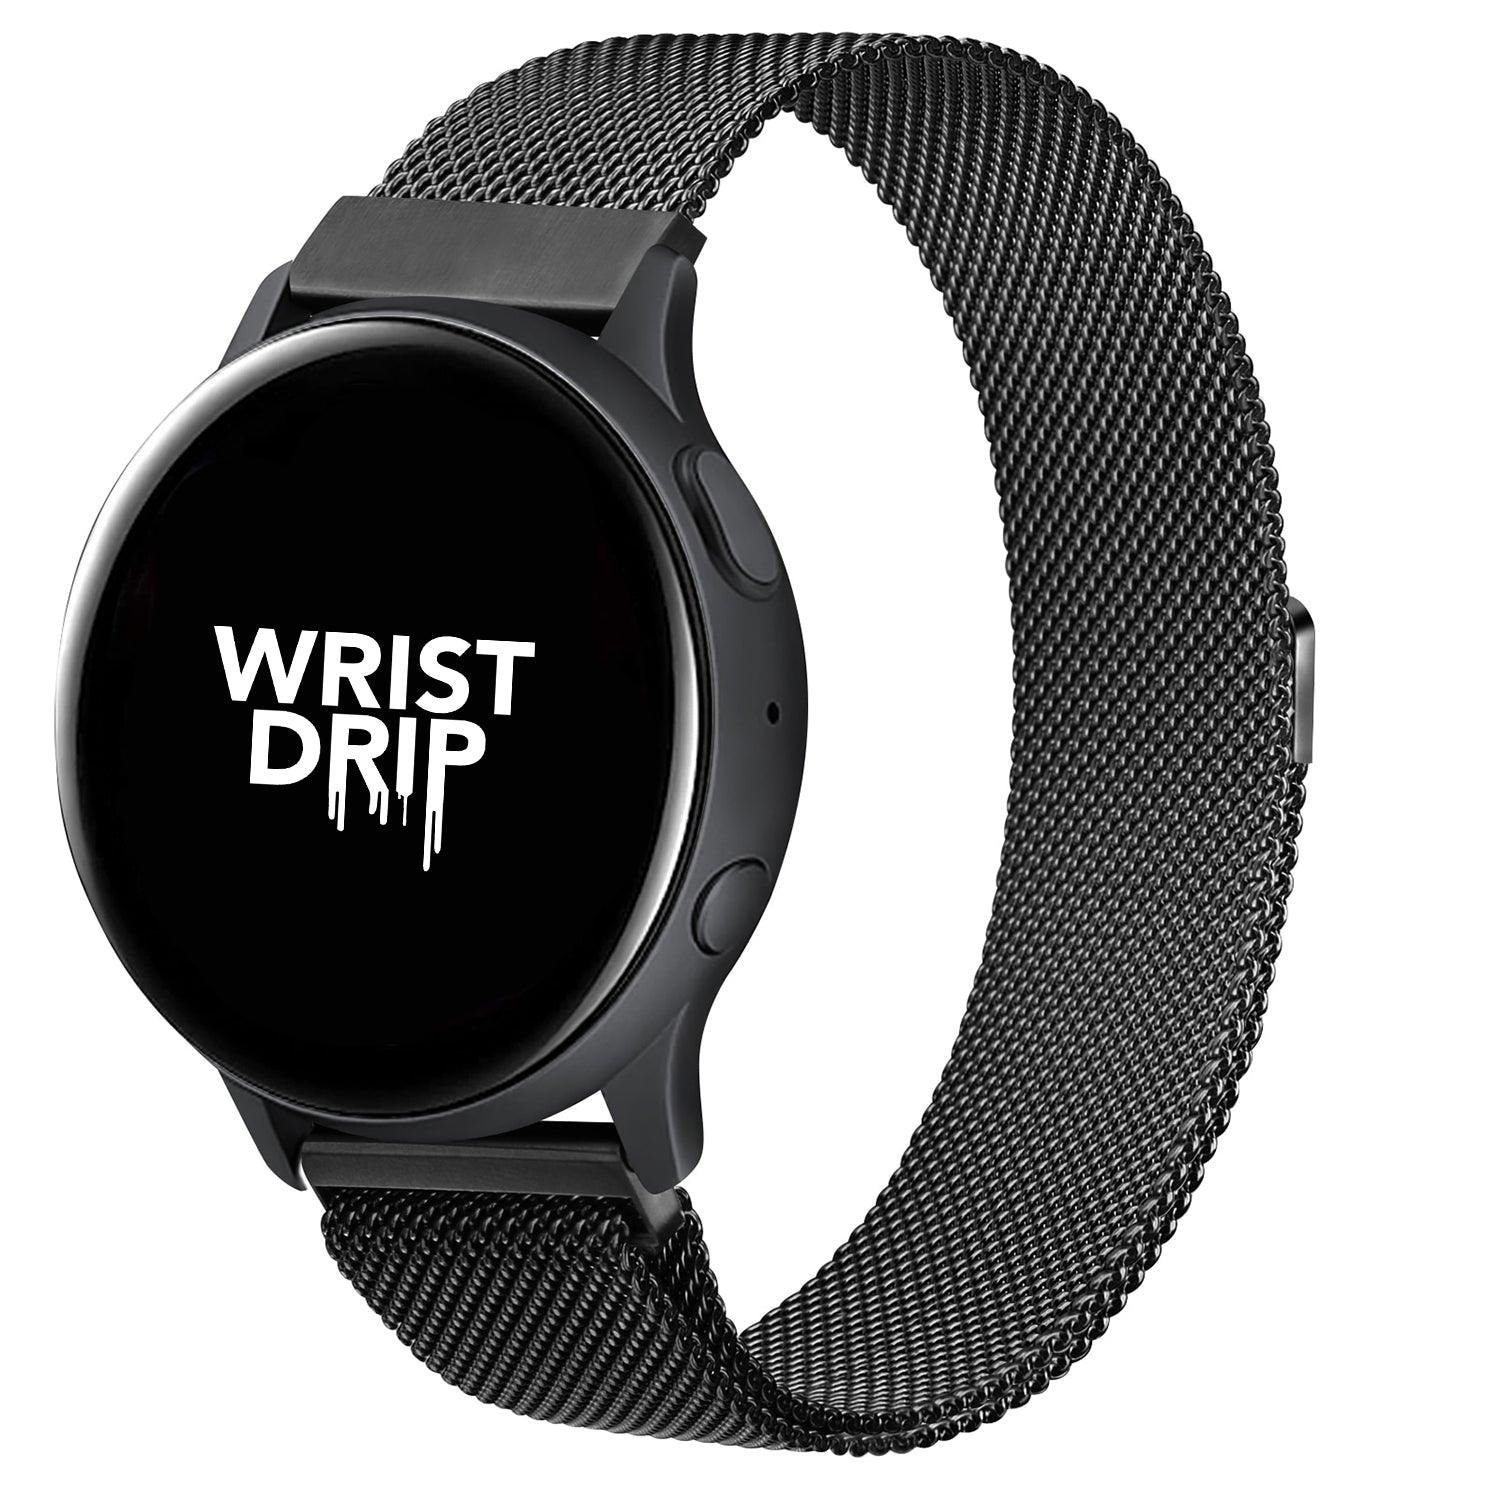 The Francois Magnetic Samsung Galaxy Watch Band (7 Colours) - shopwristdrip